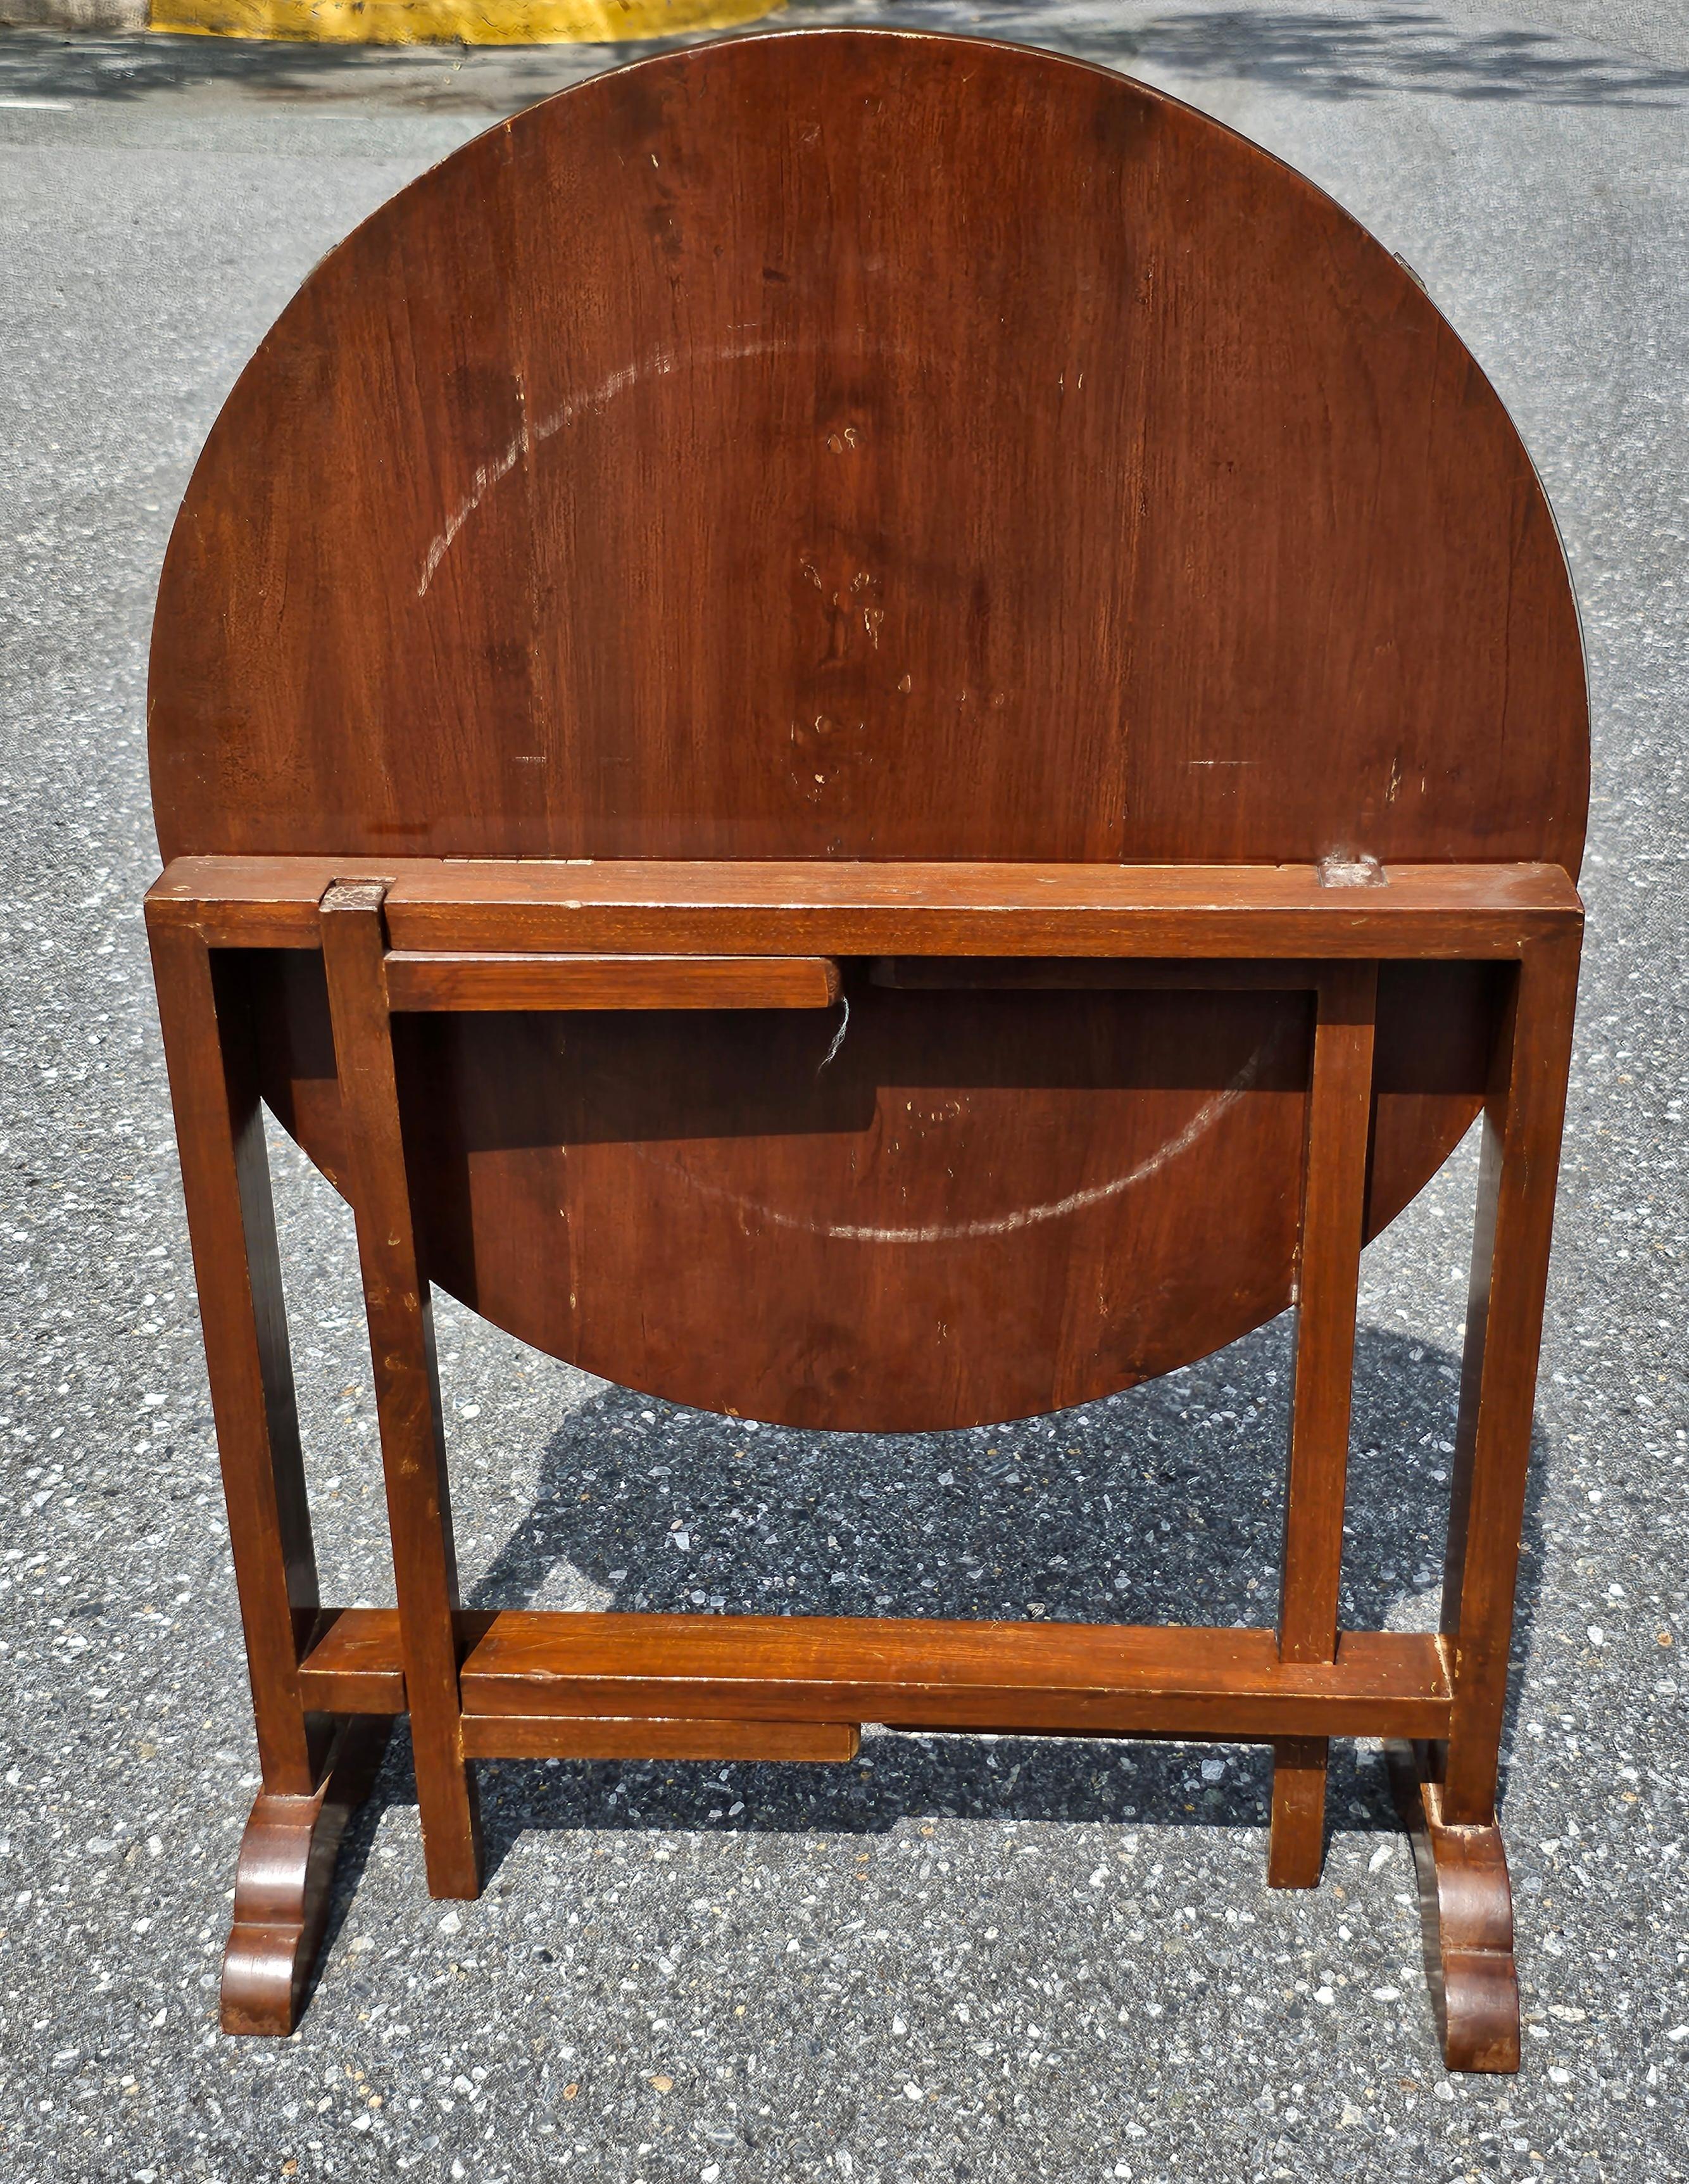 20th Century Chinese Carved Hardwood And Glass Tilt-Top Tea Table or Side Table For Sale